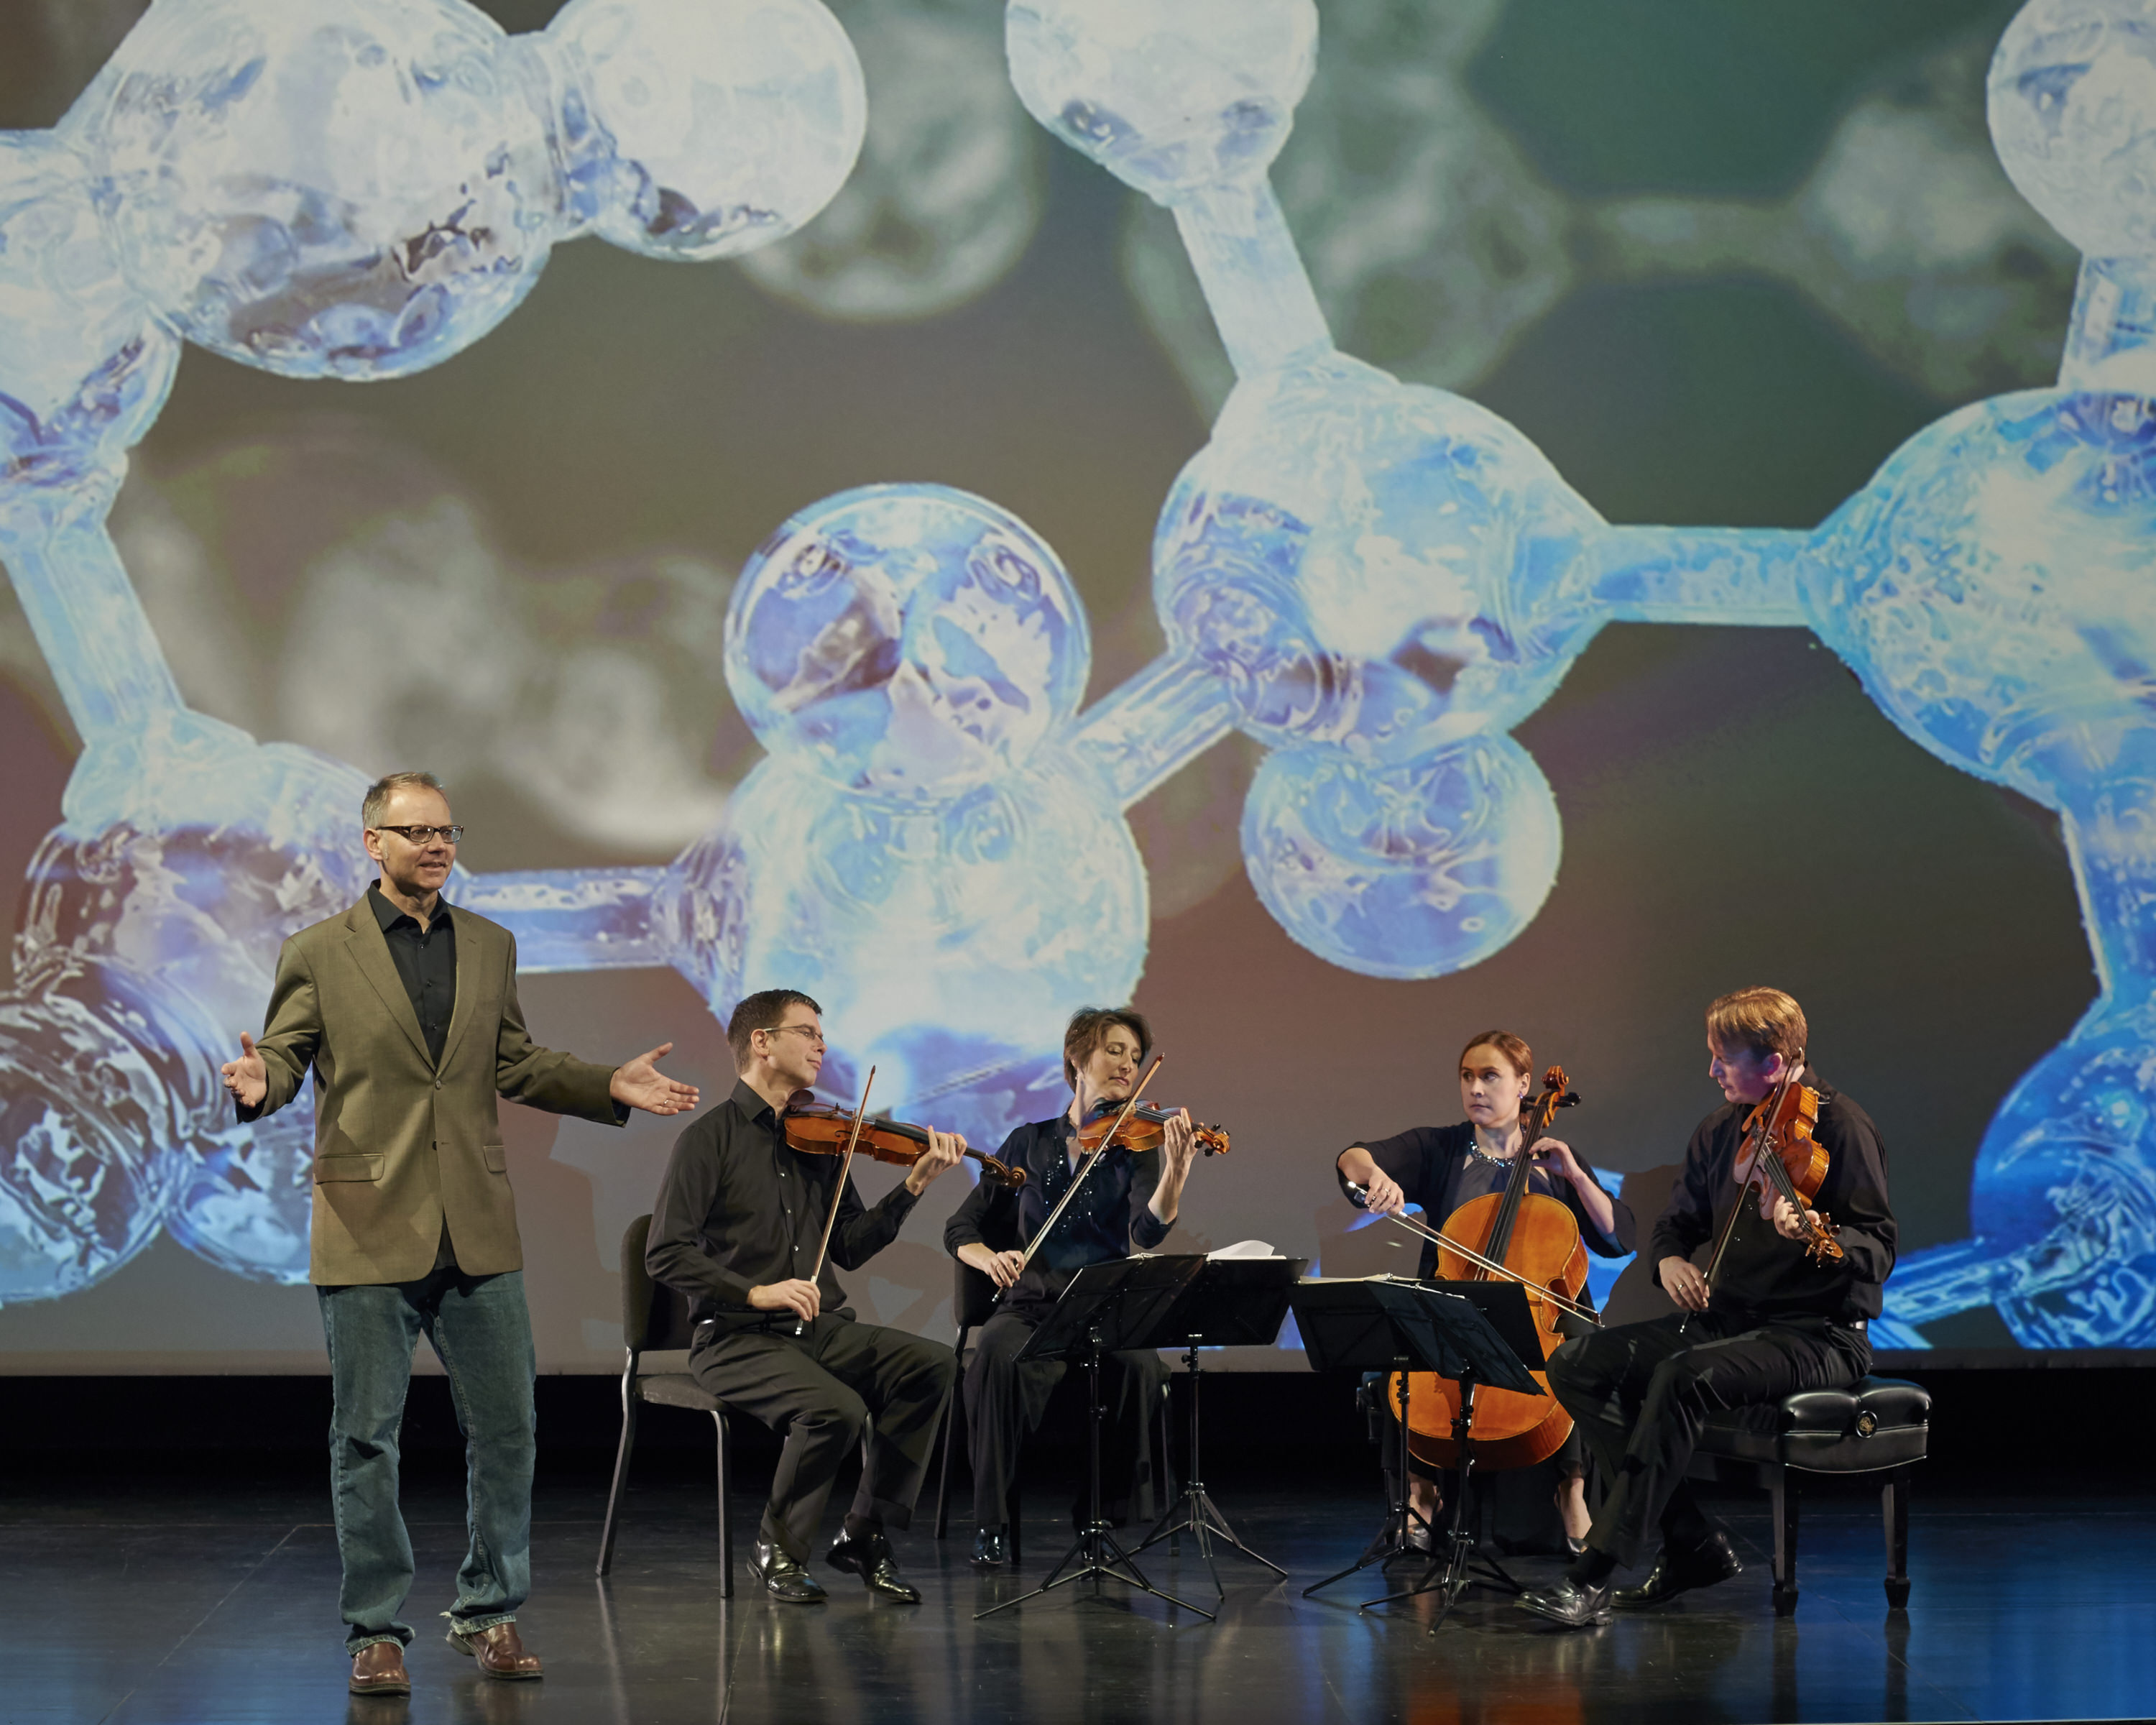 performer stands speaking by seated musicians playing instruments with image of molecular structures in background